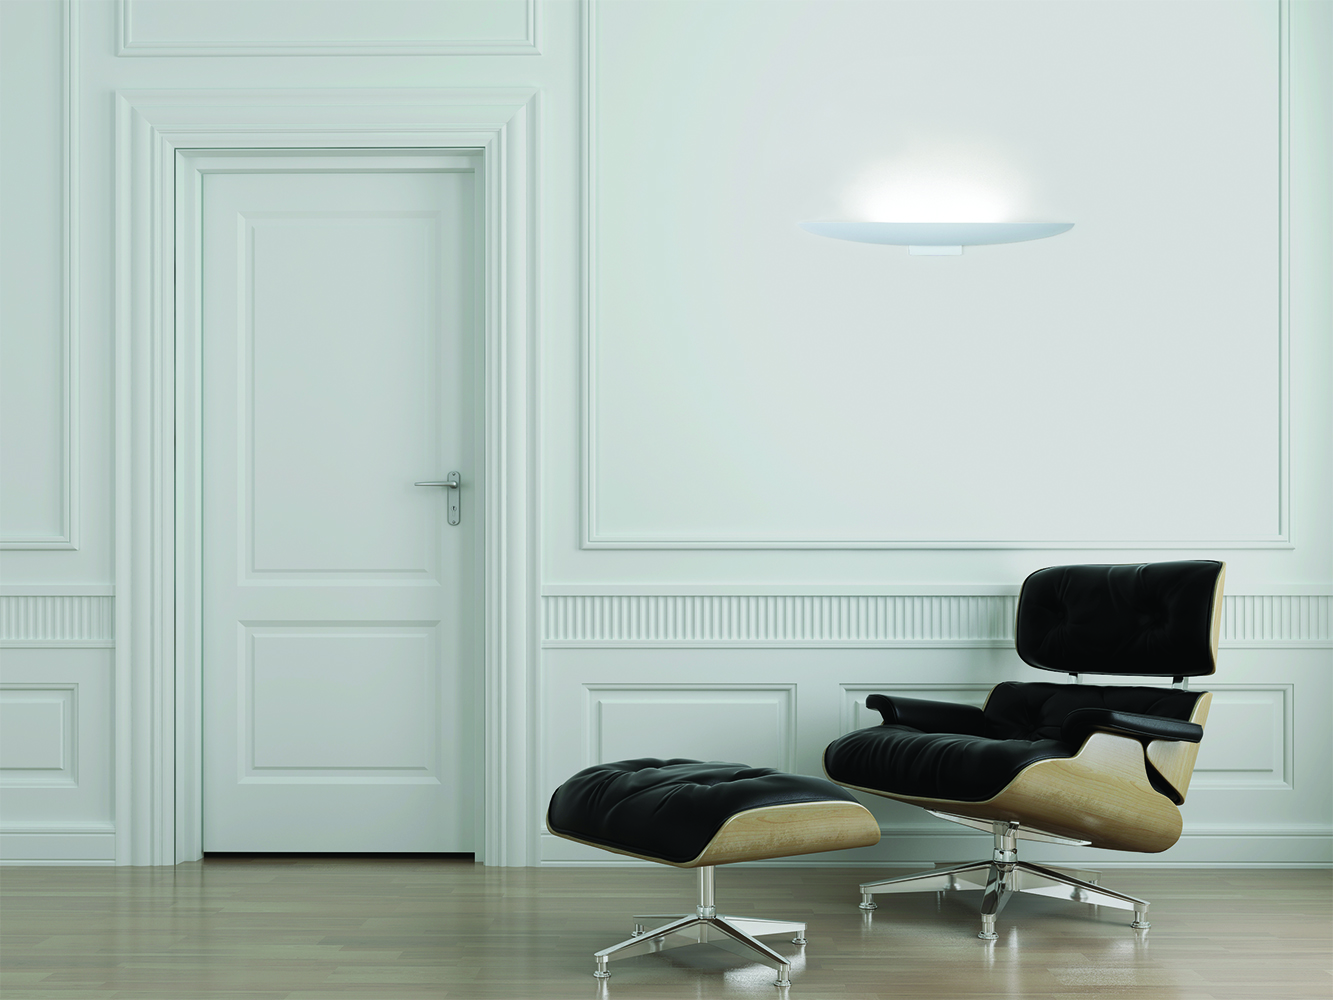 Escape wall sconce as an office lighting fixture, providing minimalism in a reception waiting area